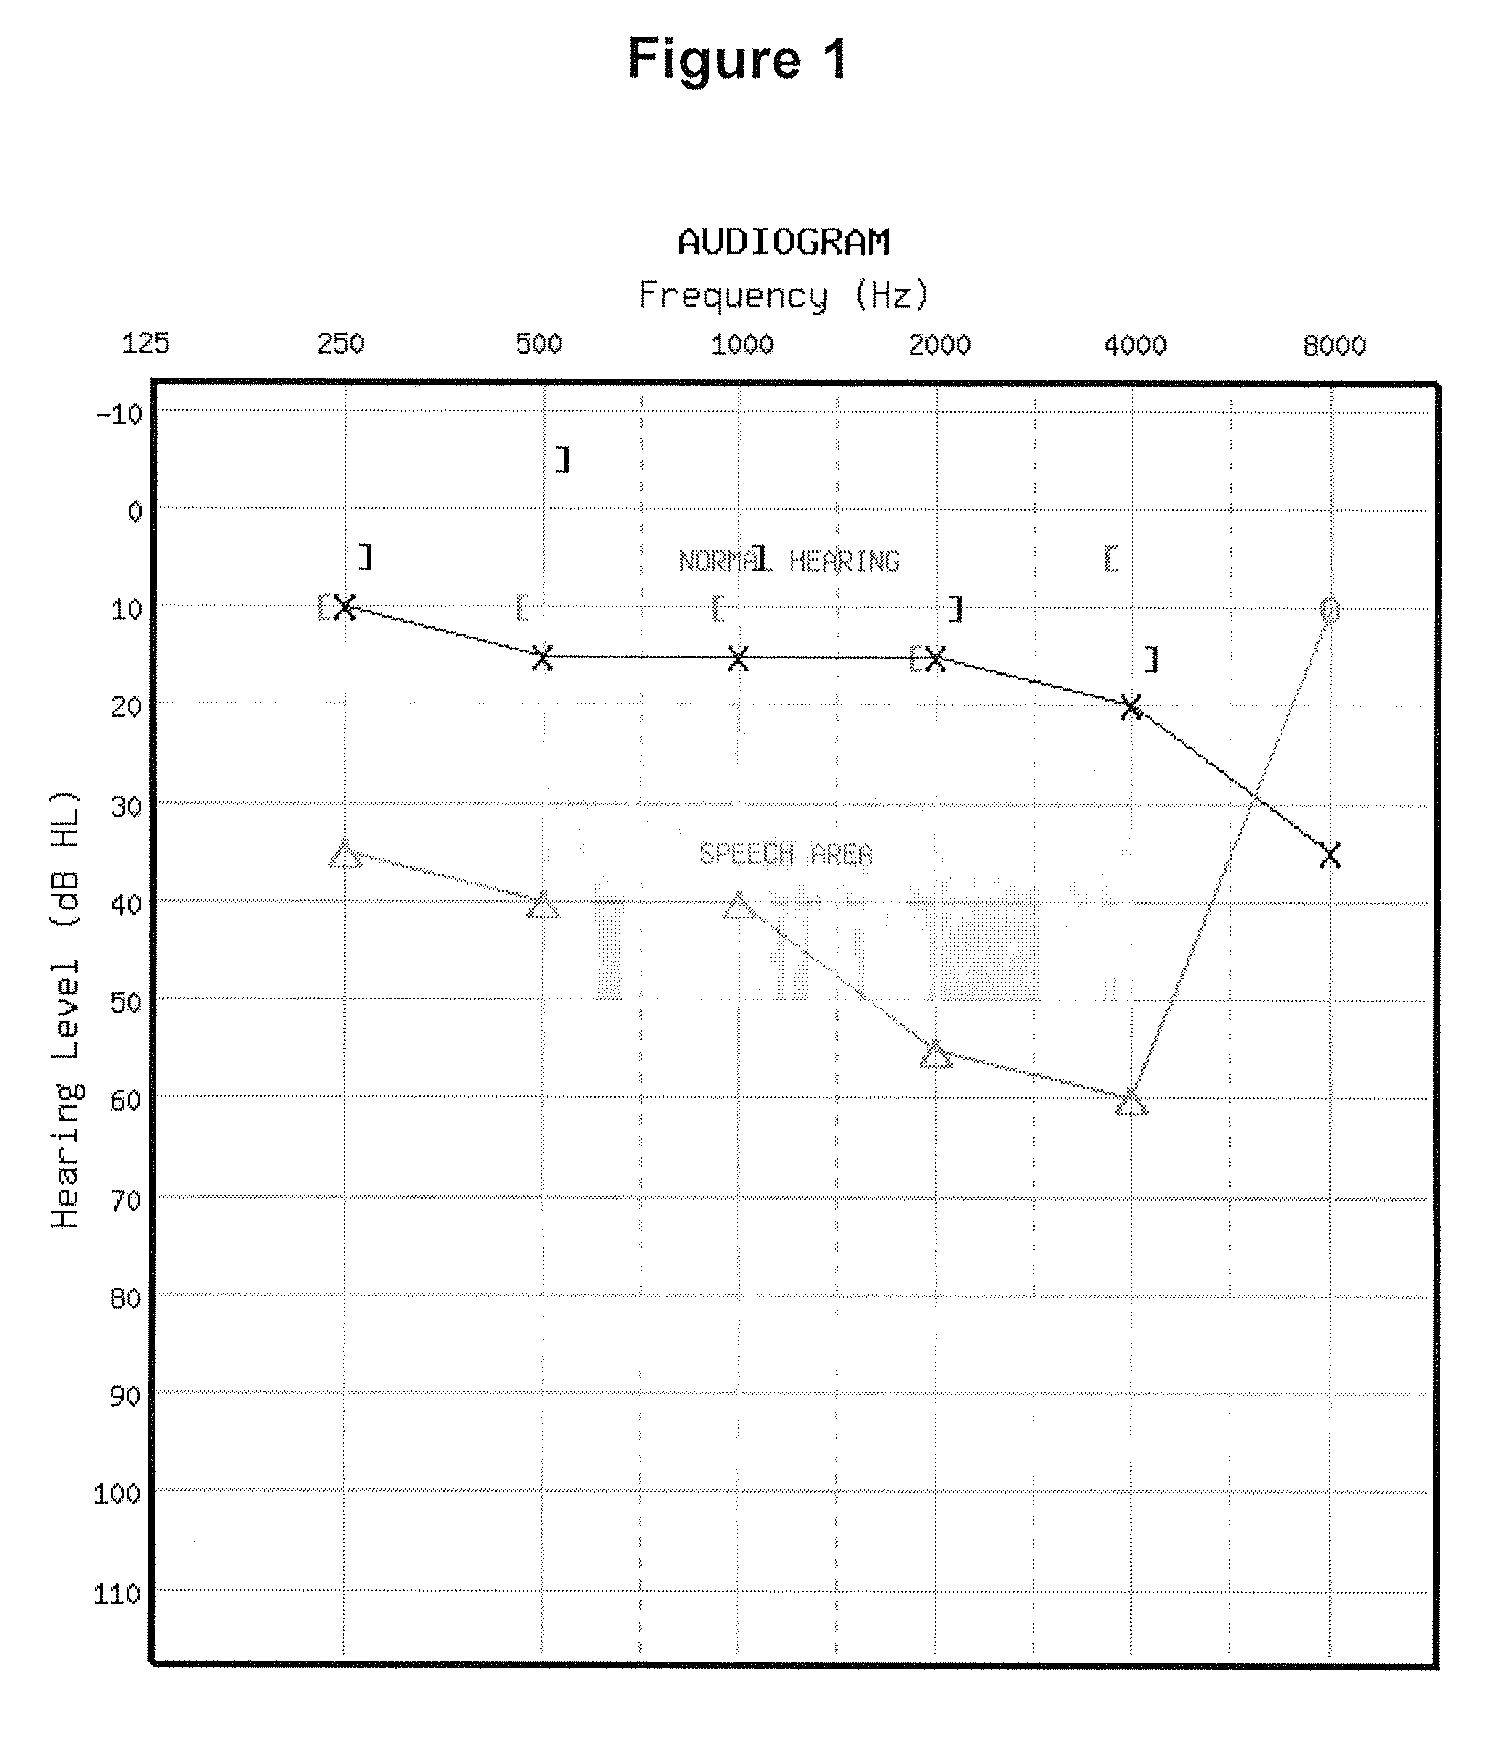 Audiogram classification system